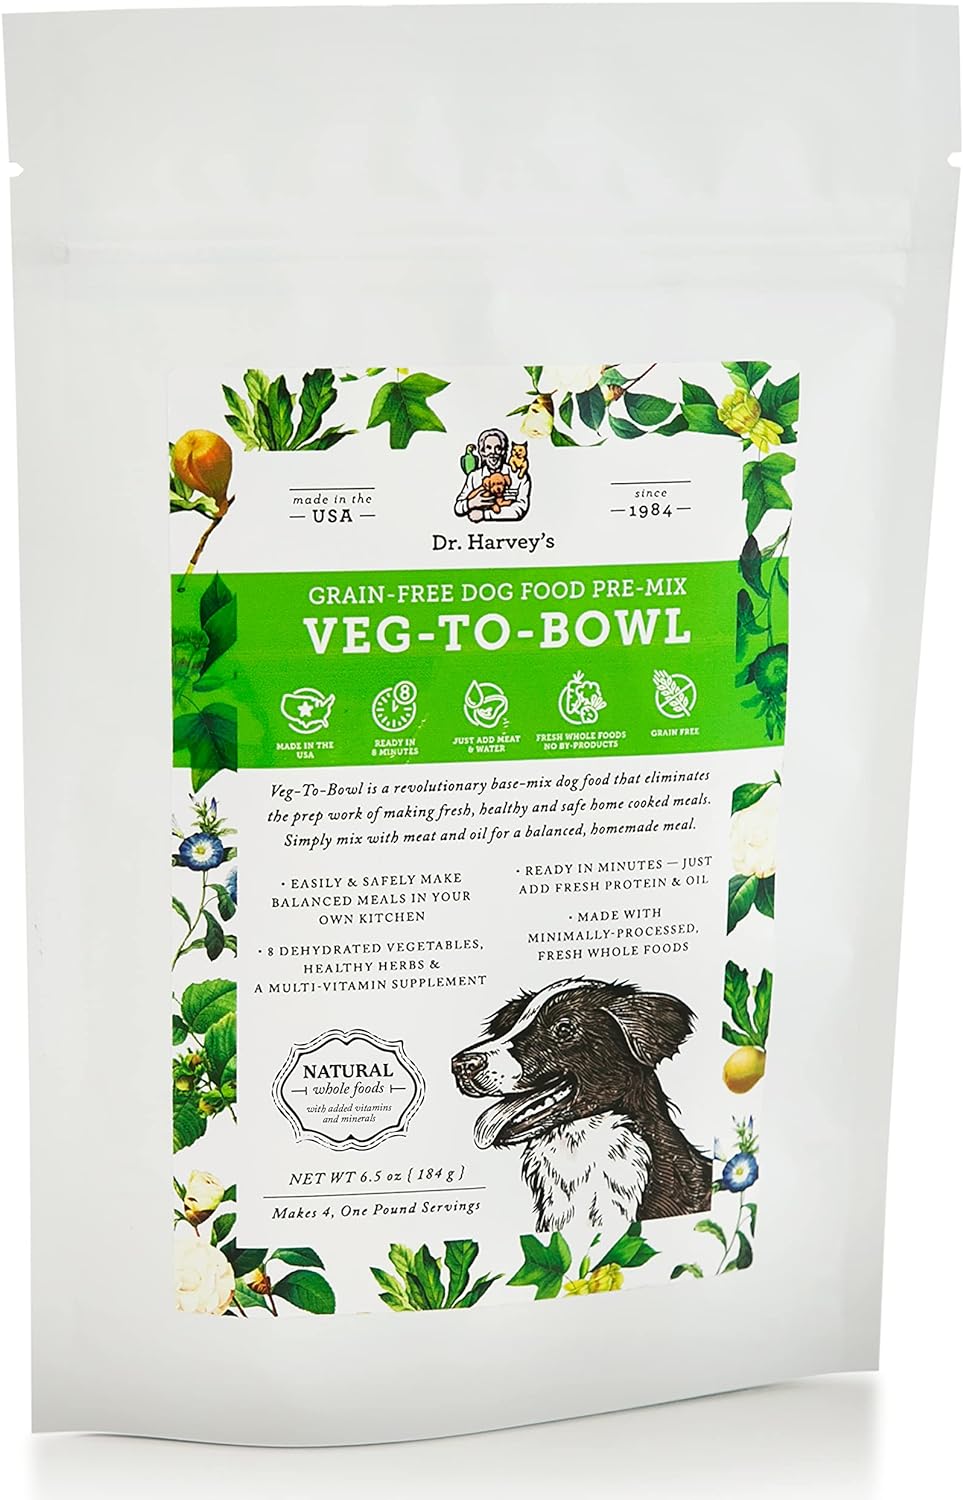 Dr. Harvey's Veg-to-Bowl Dog Food, Human Grade Dehydrated Base Mix for Dogs, Grain Free Holistic Mix, Trial Size (6.5 Oz)